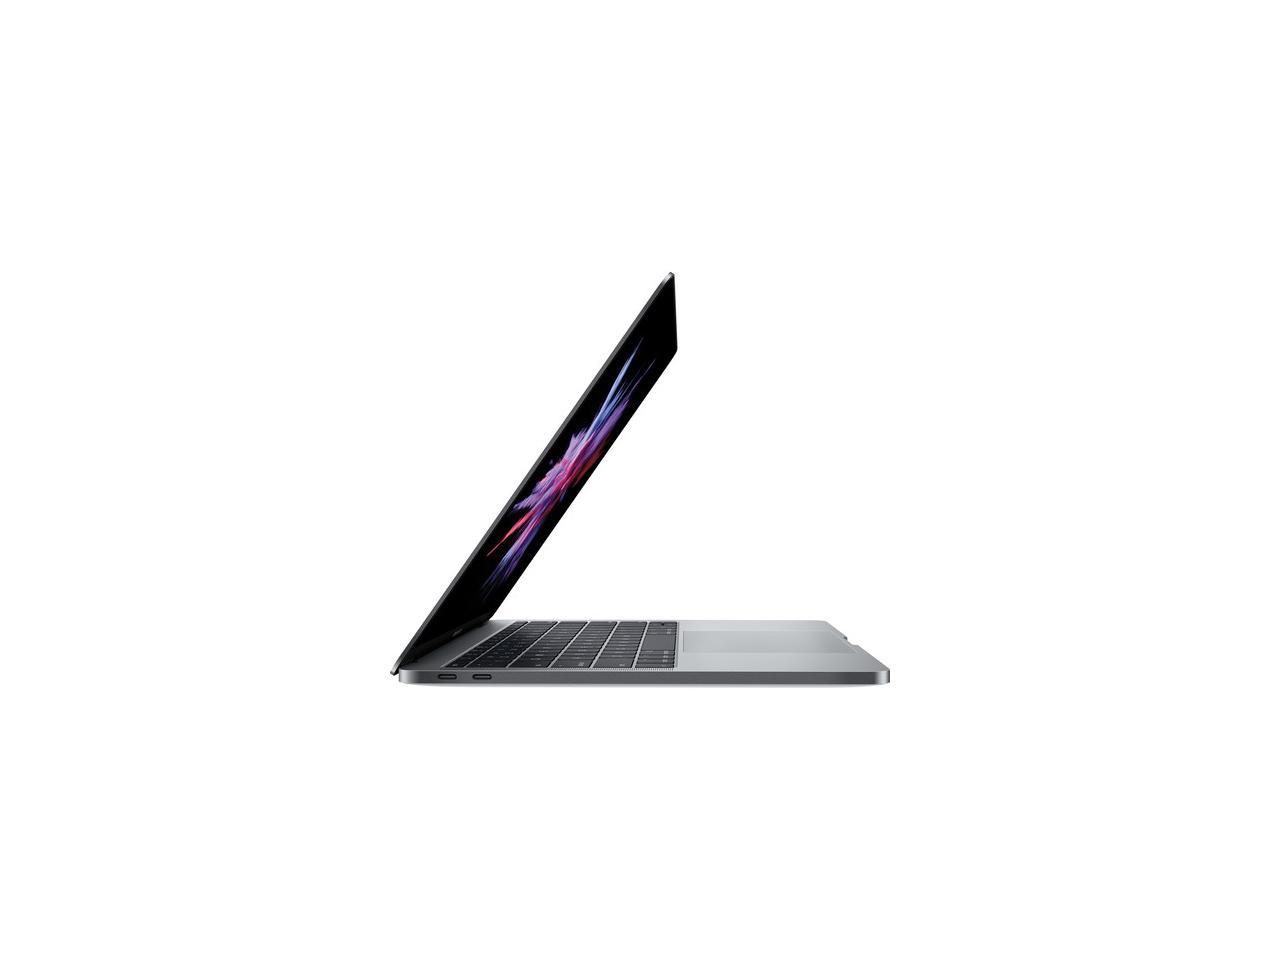 2016 macbook pro 13 without touch bar 8gb